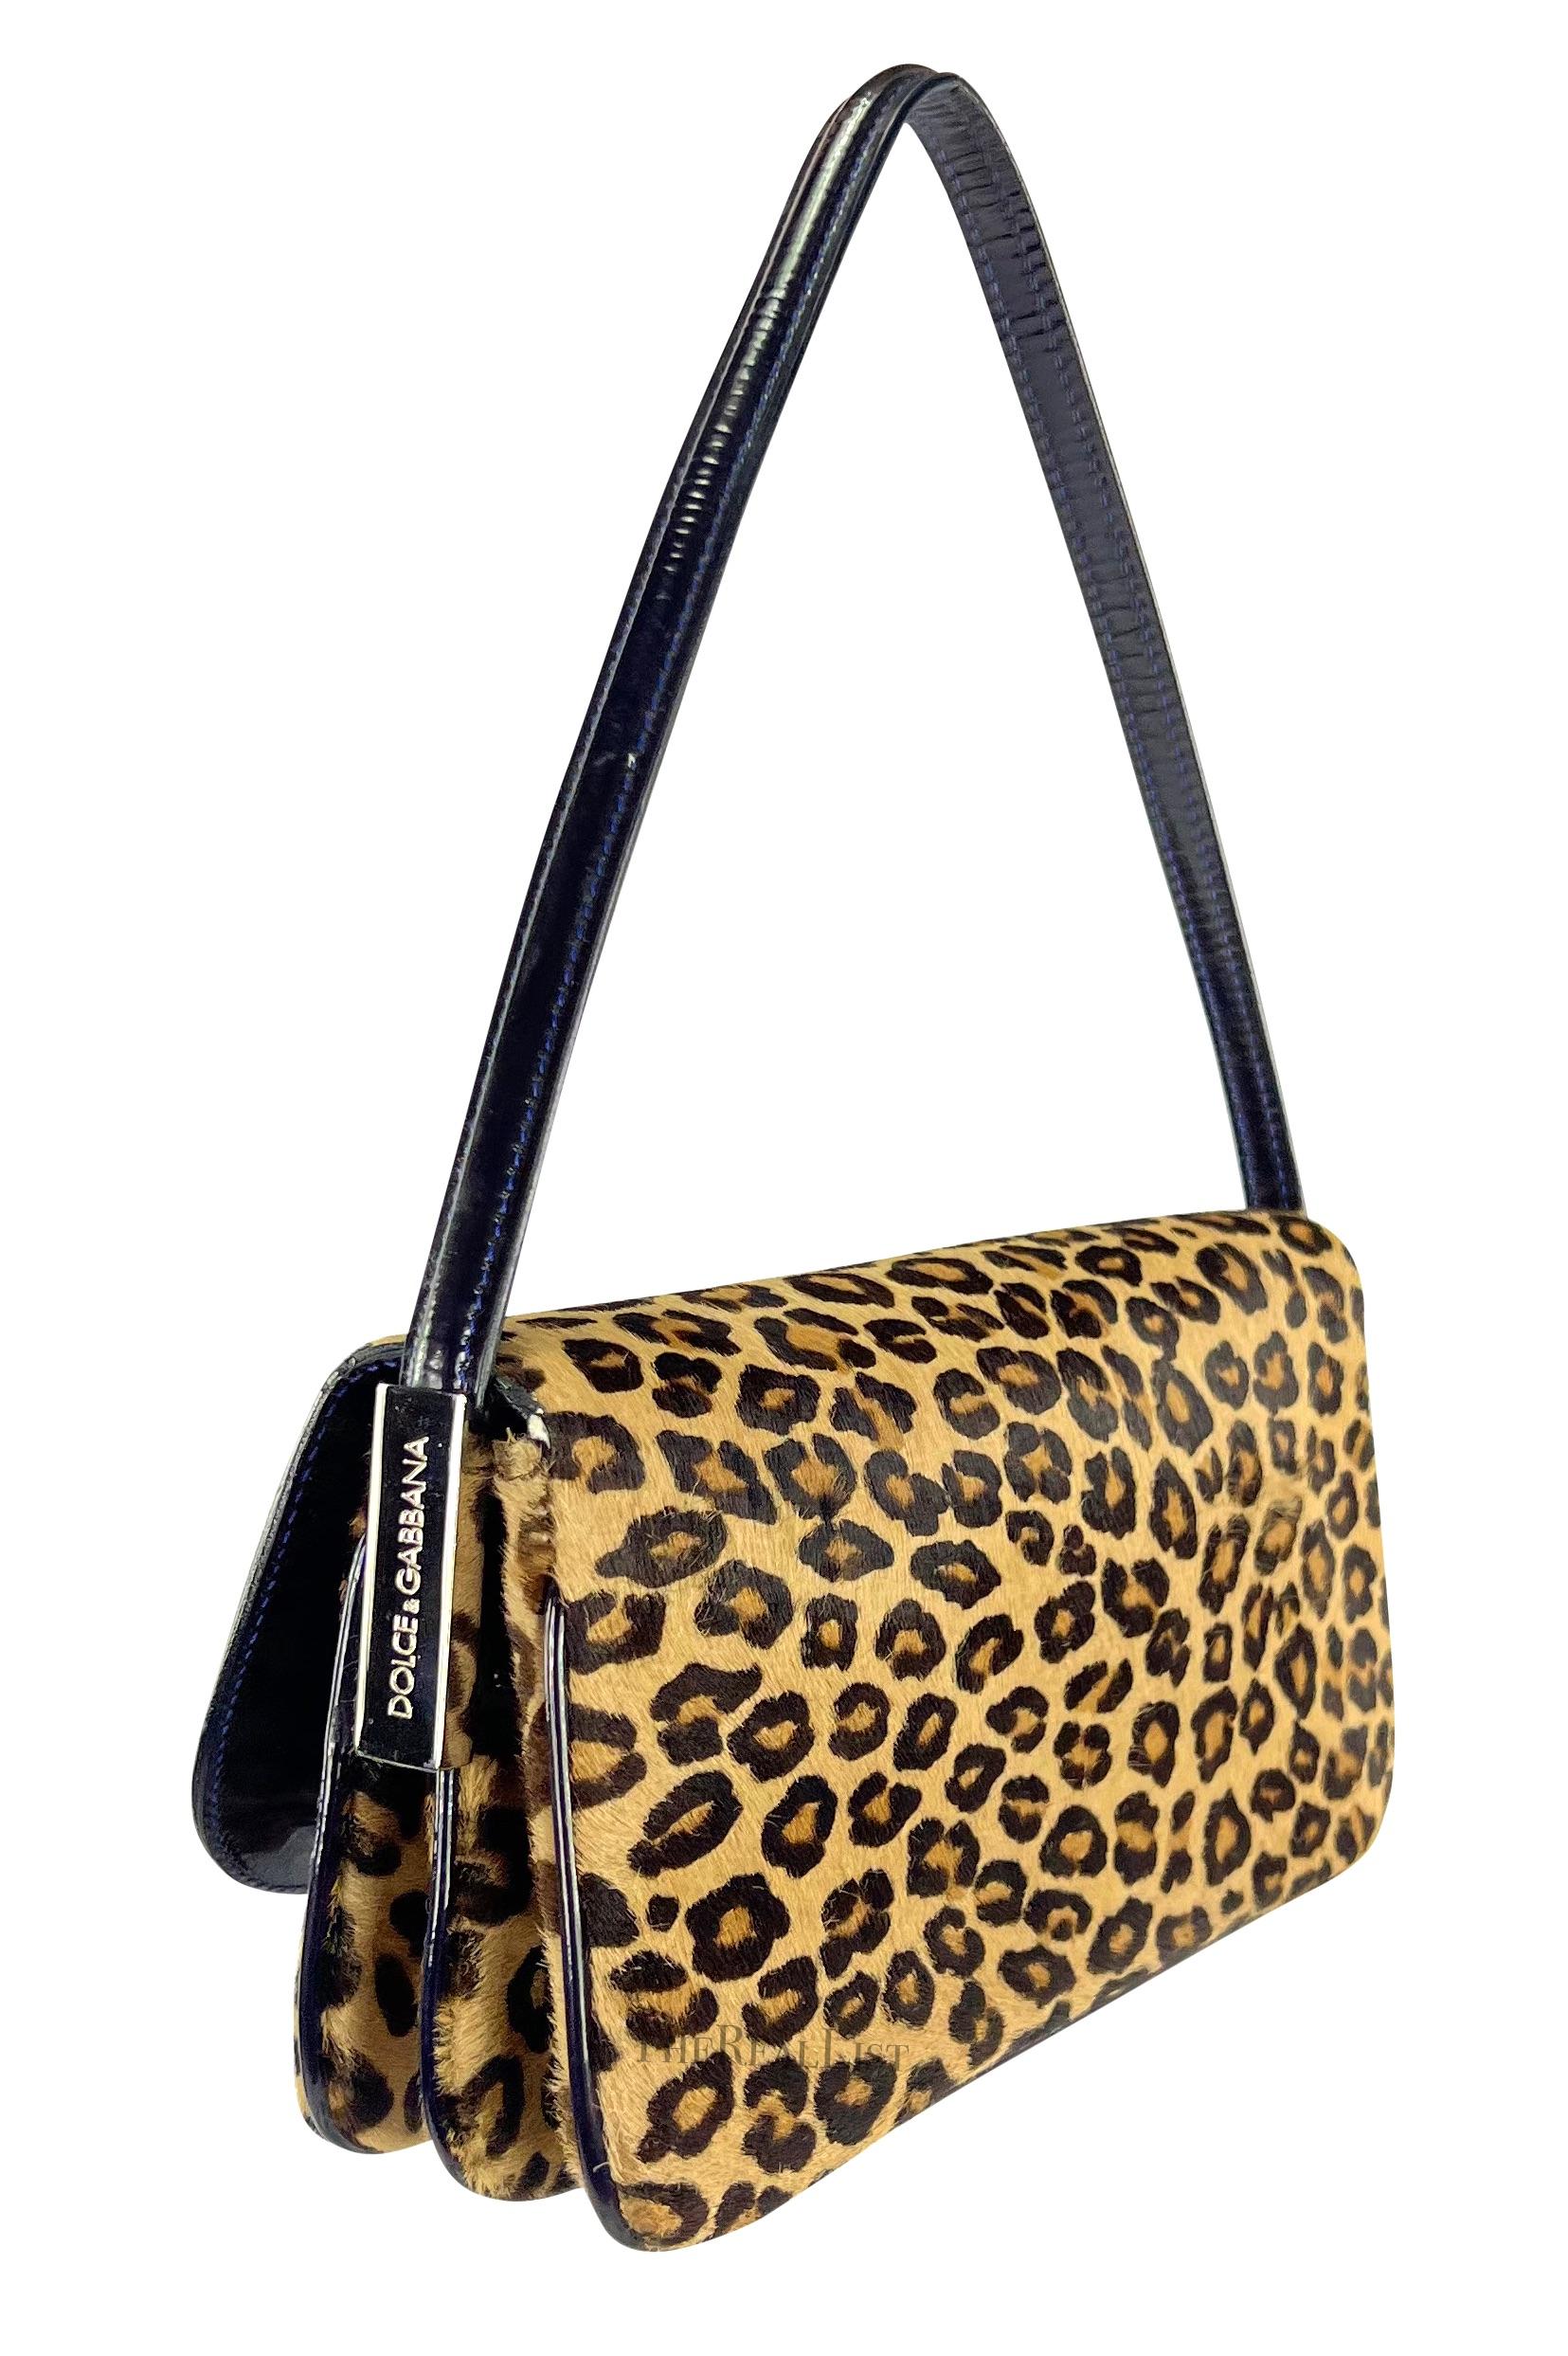 F/W 2000 Dolce & Gabbana Cheetah Print Pony Hair Small Shoulder Bag In Excellent Condition For Sale In West Hollywood, CA